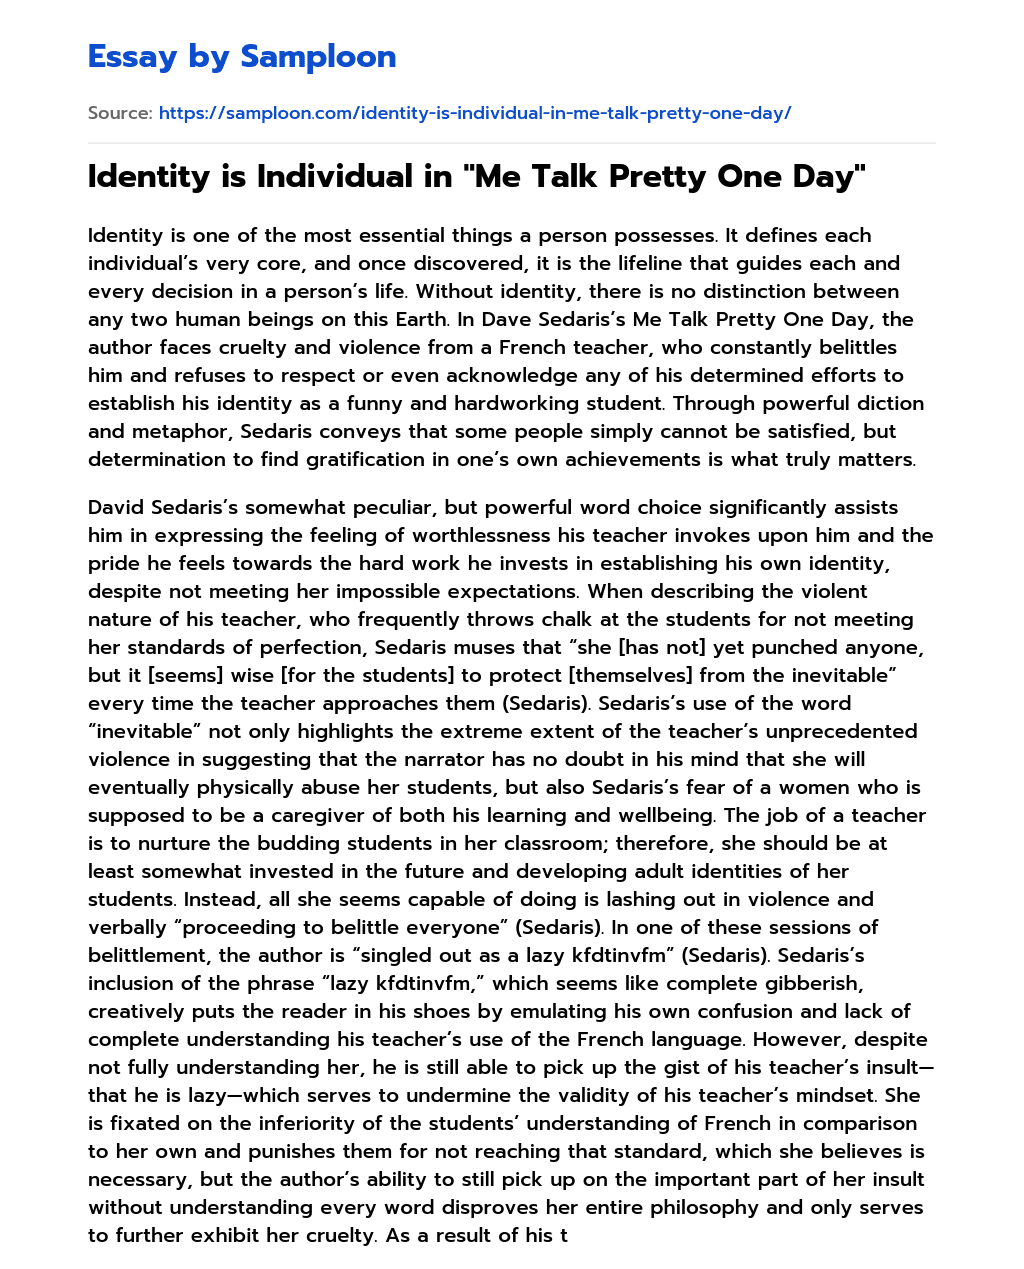 Identity is Individual in “Me Talk Pretty One Day” essay